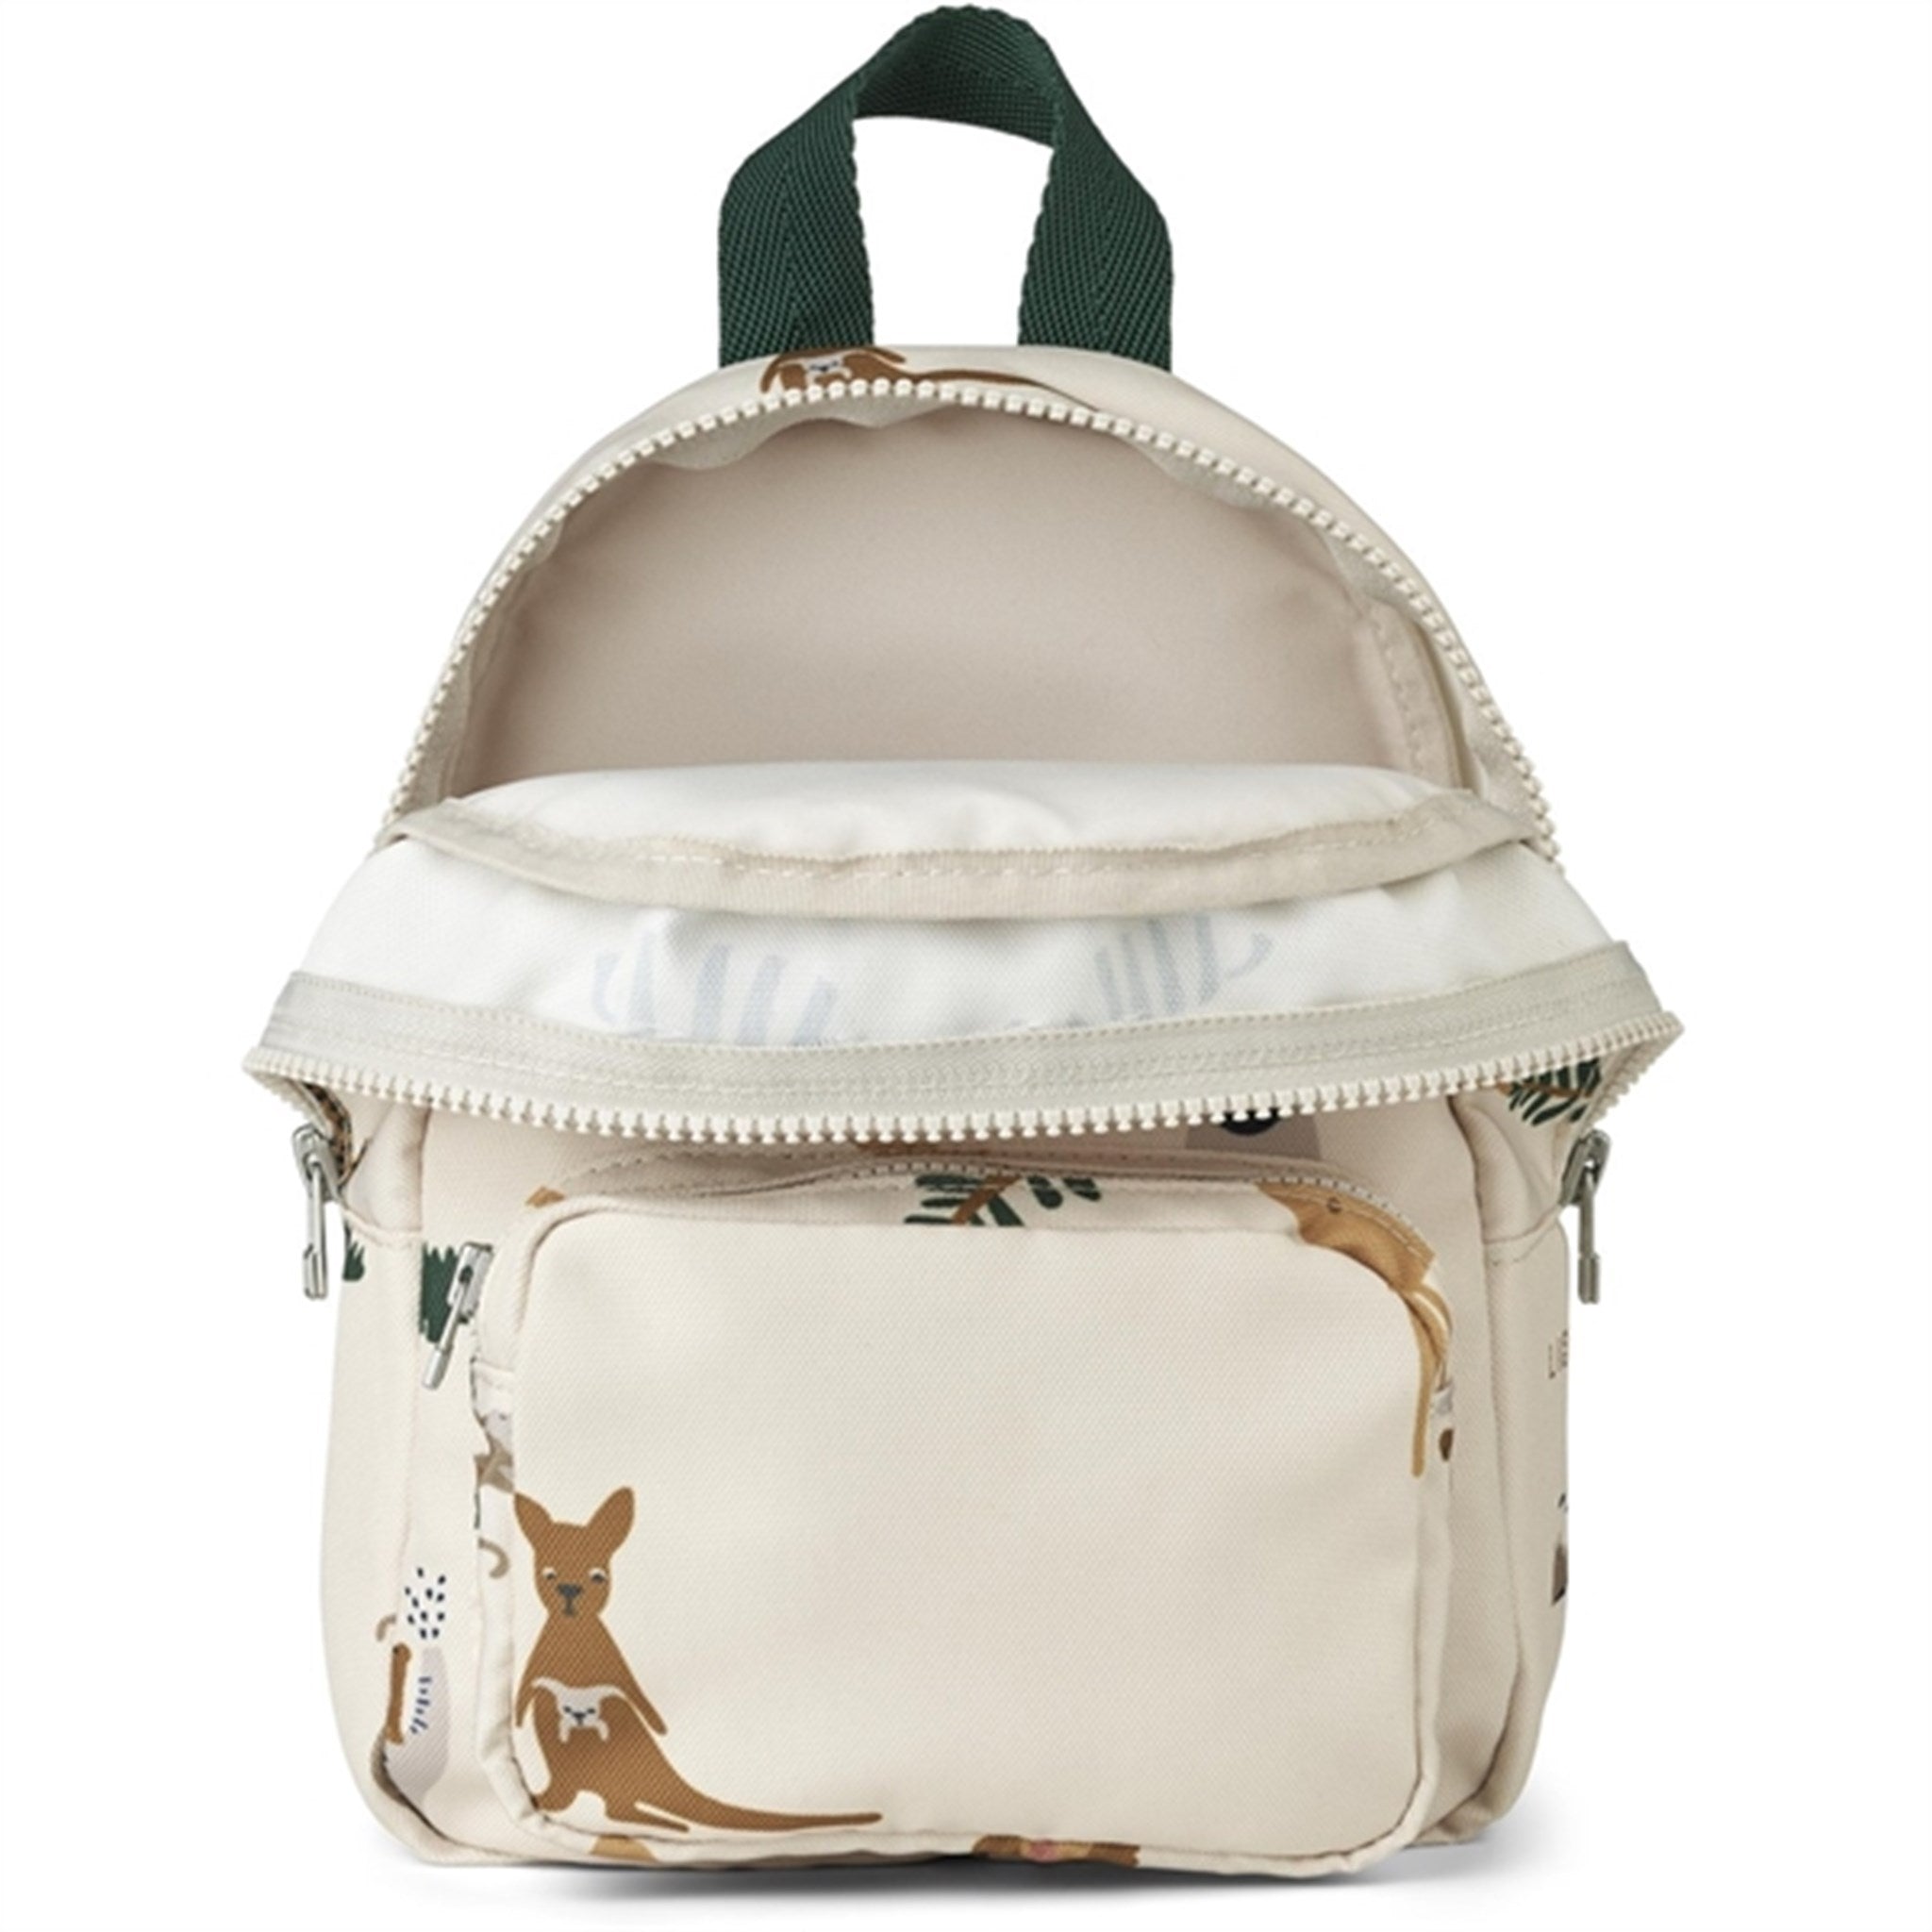 Liewood Saxo Mini Backpack All Together/Sandy 2